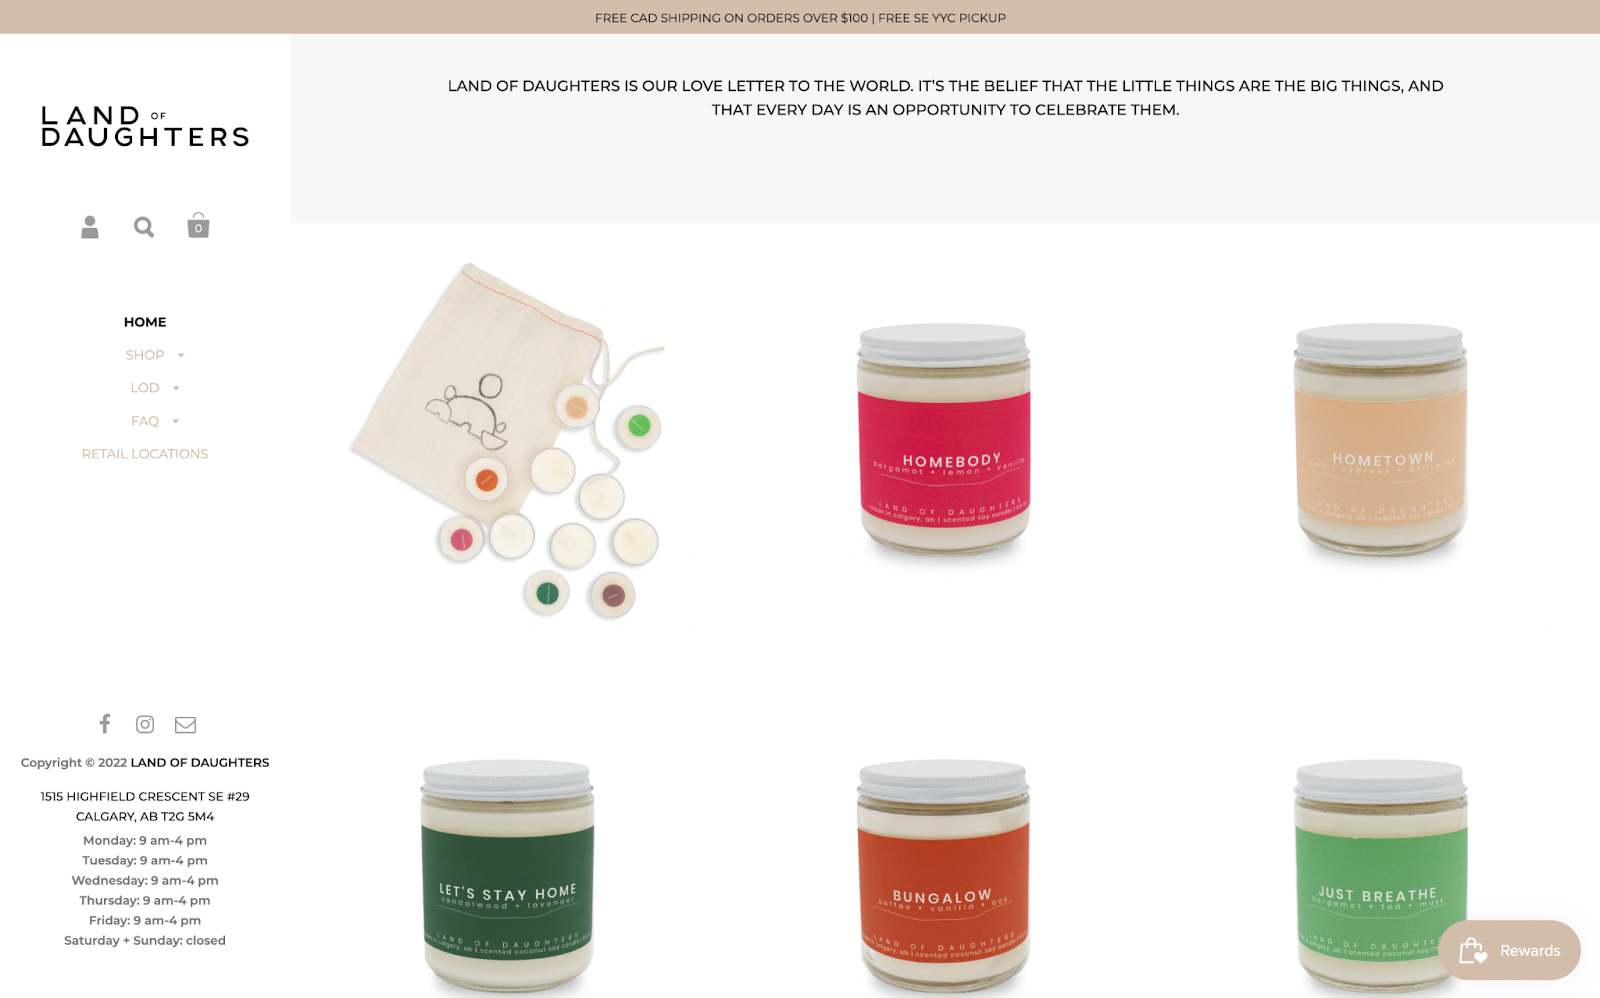 Creative rewards program names–A screenshot of Land of Daughter’s products. There are 5 candles labeled: Homebody, Hometown, Let’s Stay Home, Bungalow, and Just Breathe. 